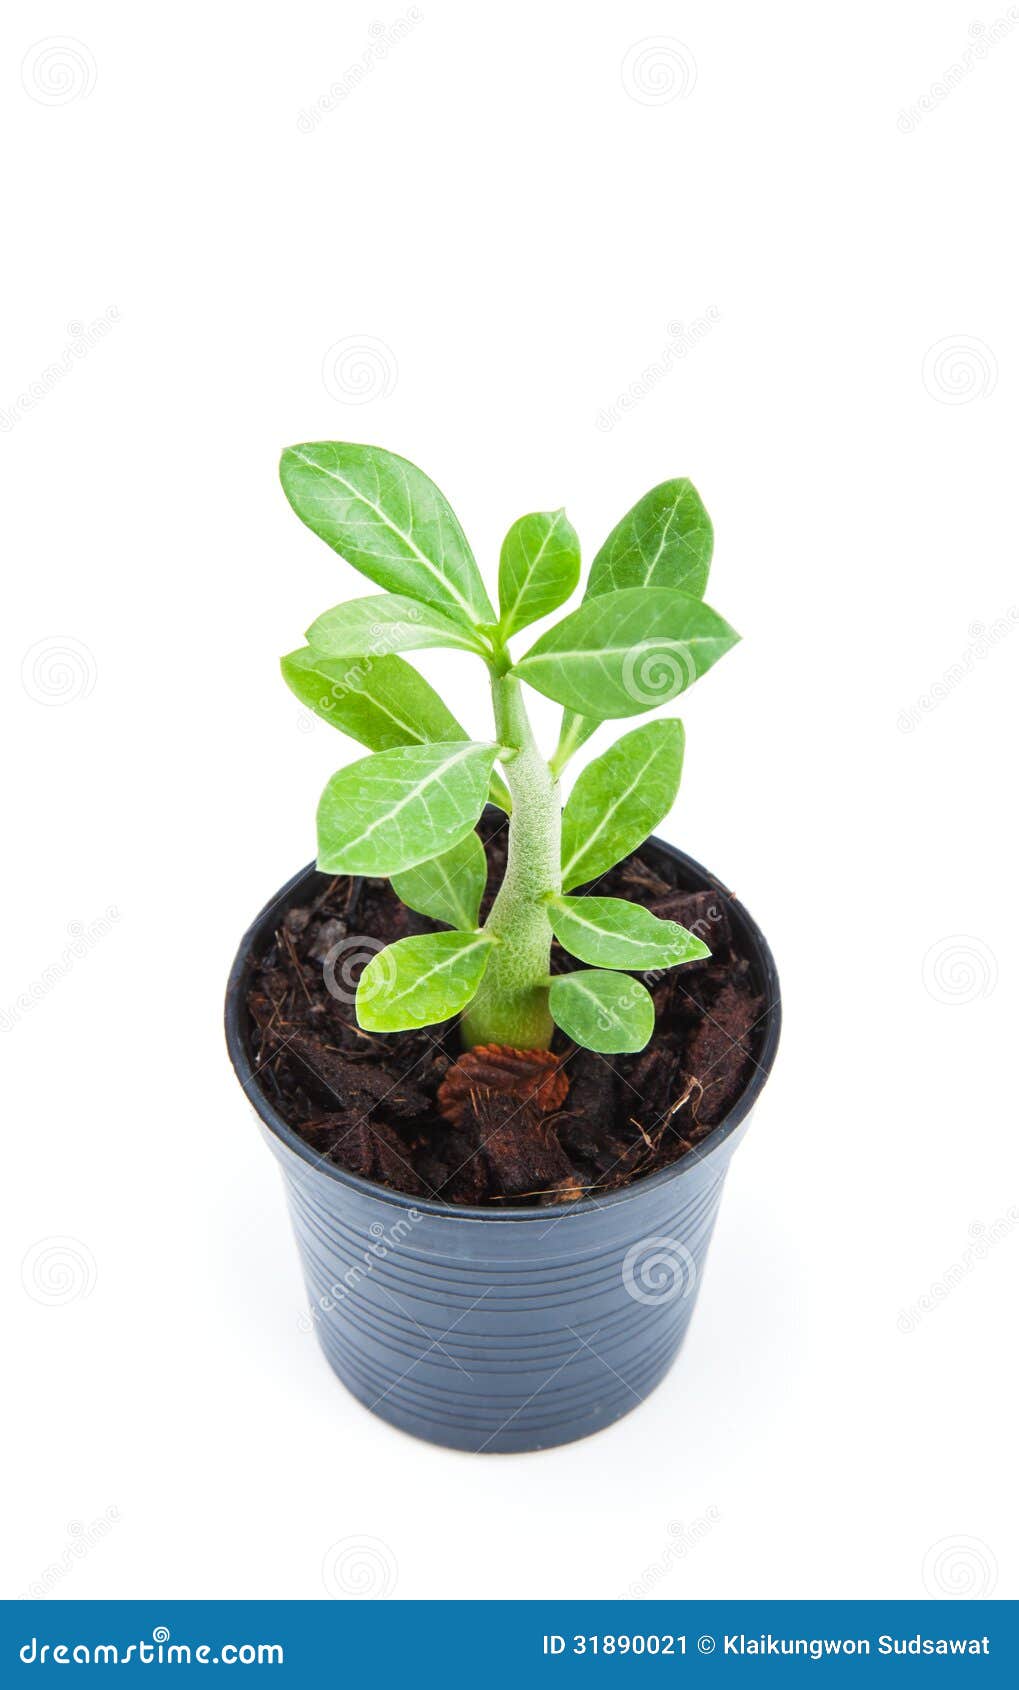  Small  Ornamental  Plants  Sprout On White Background Stock 